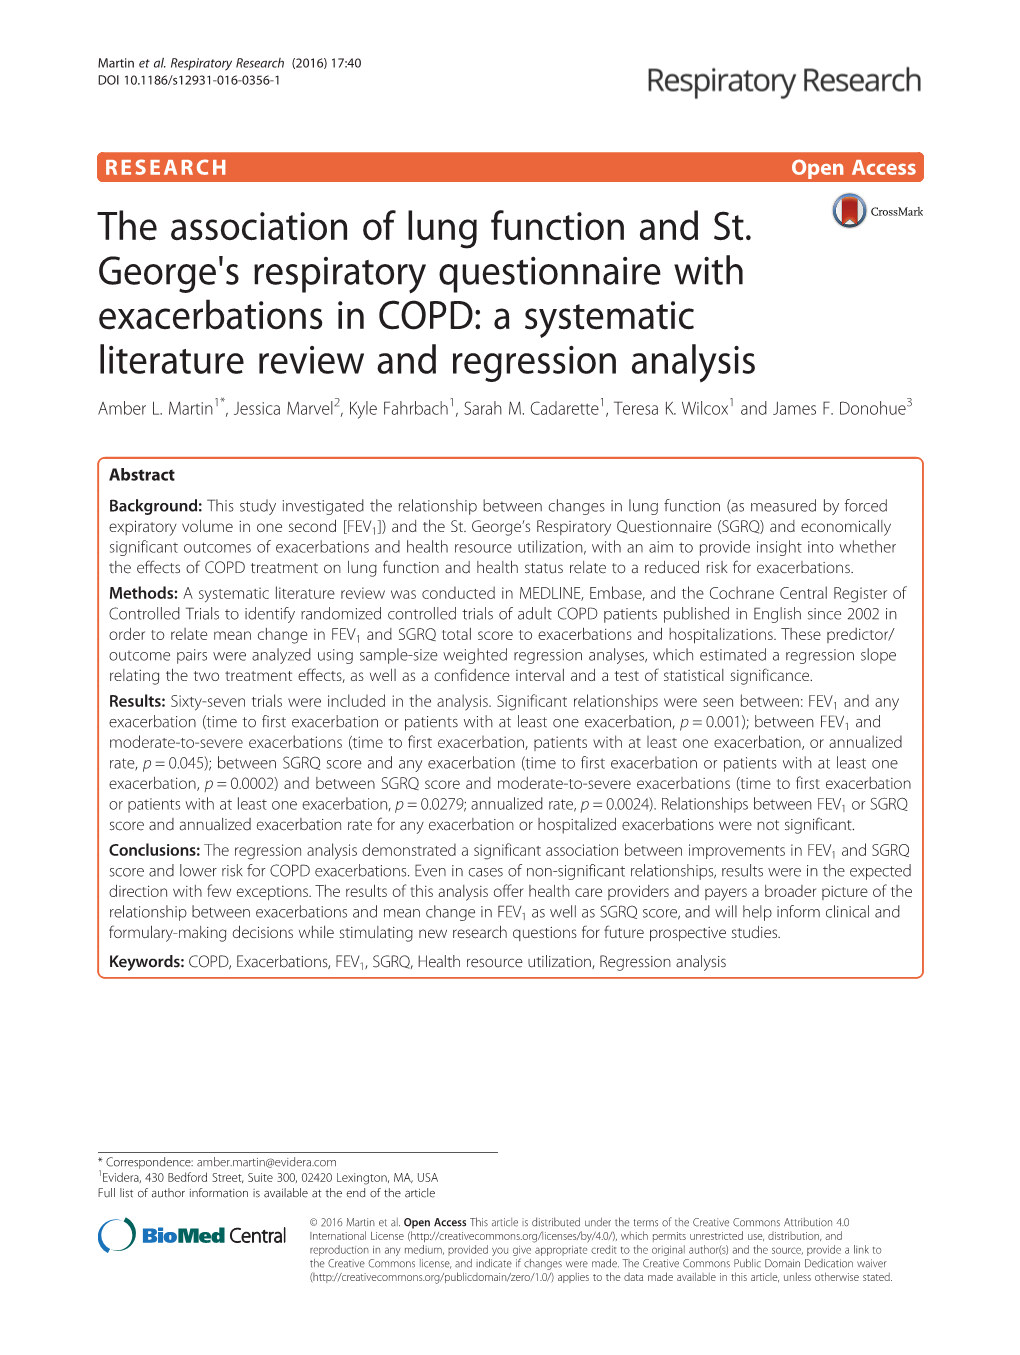 The Association of Lung Function and St. George's Respiratory Questionnaire with Exacerbations in COPD: a Systematic Literature Review and Regression Analysis Amber L